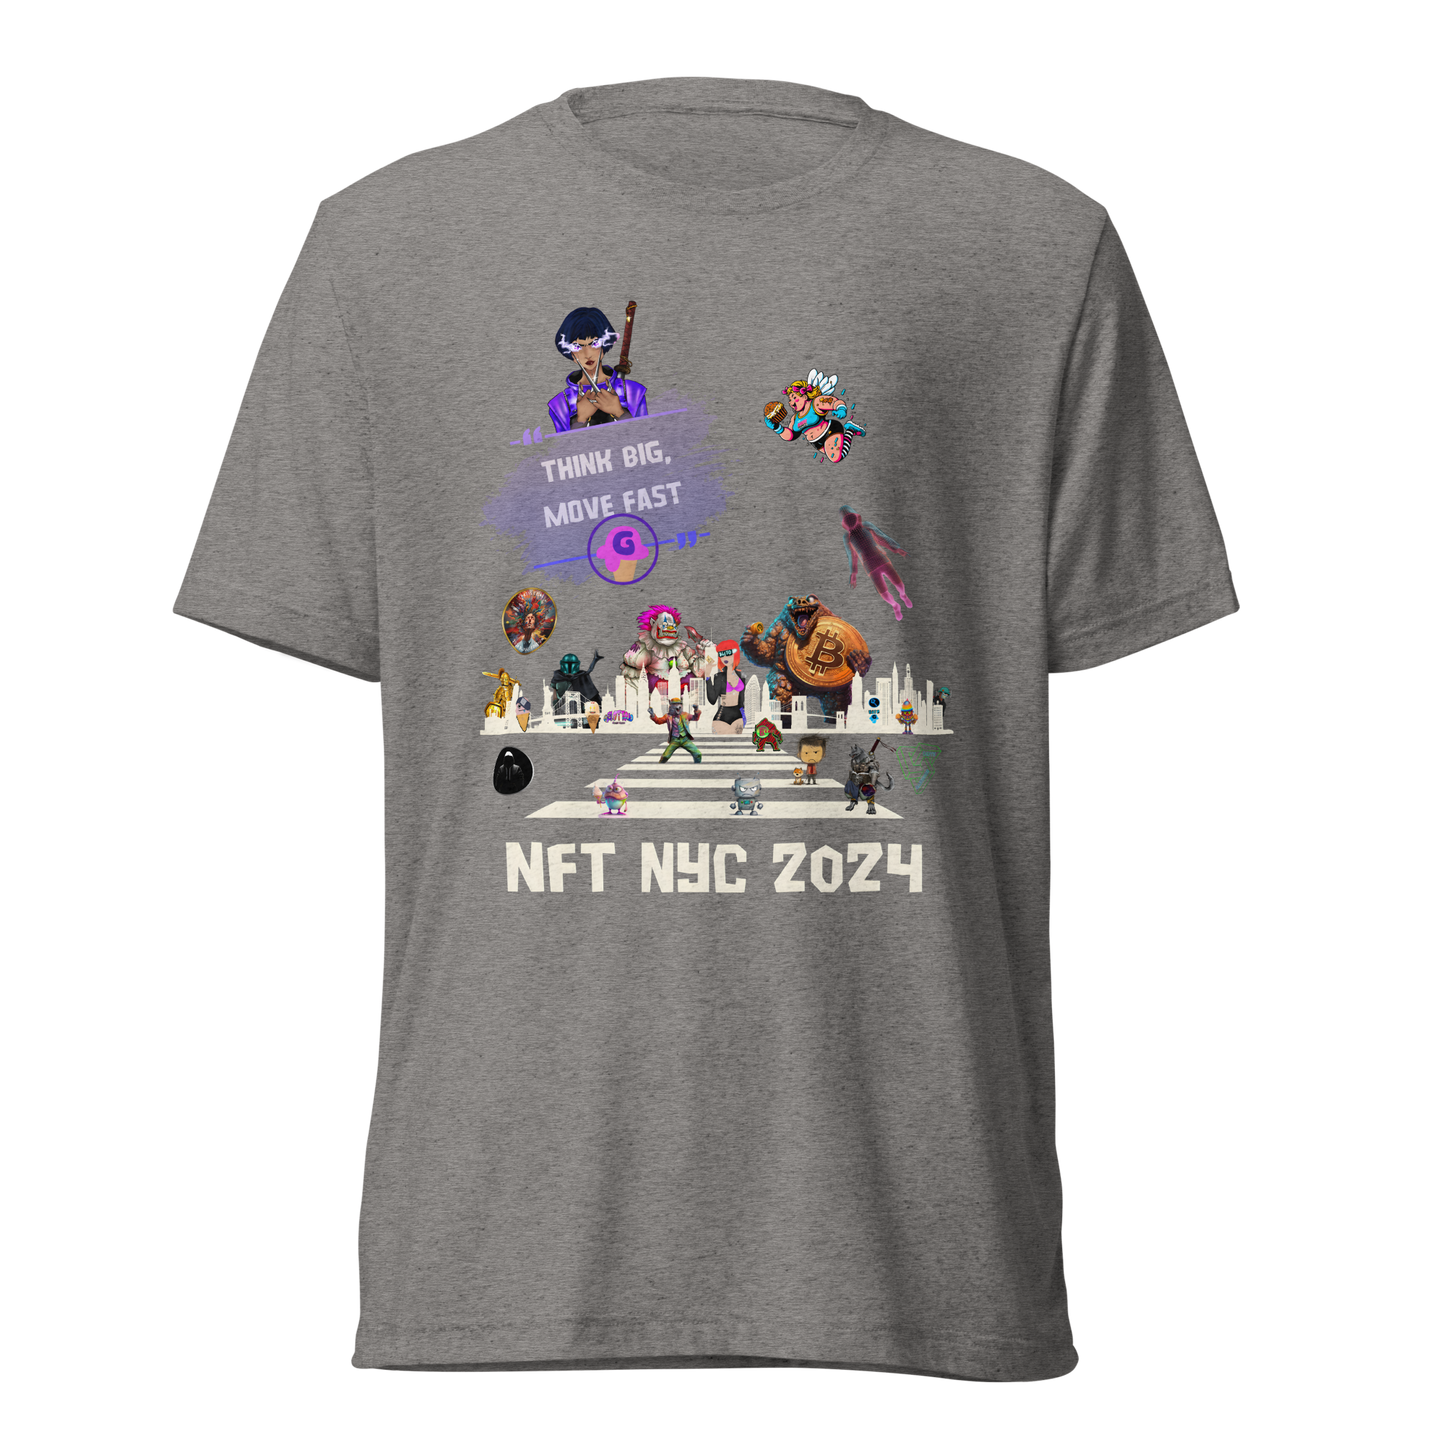 NFT NYC Super Soft Short sleeve t-shirt (Limited Edition)